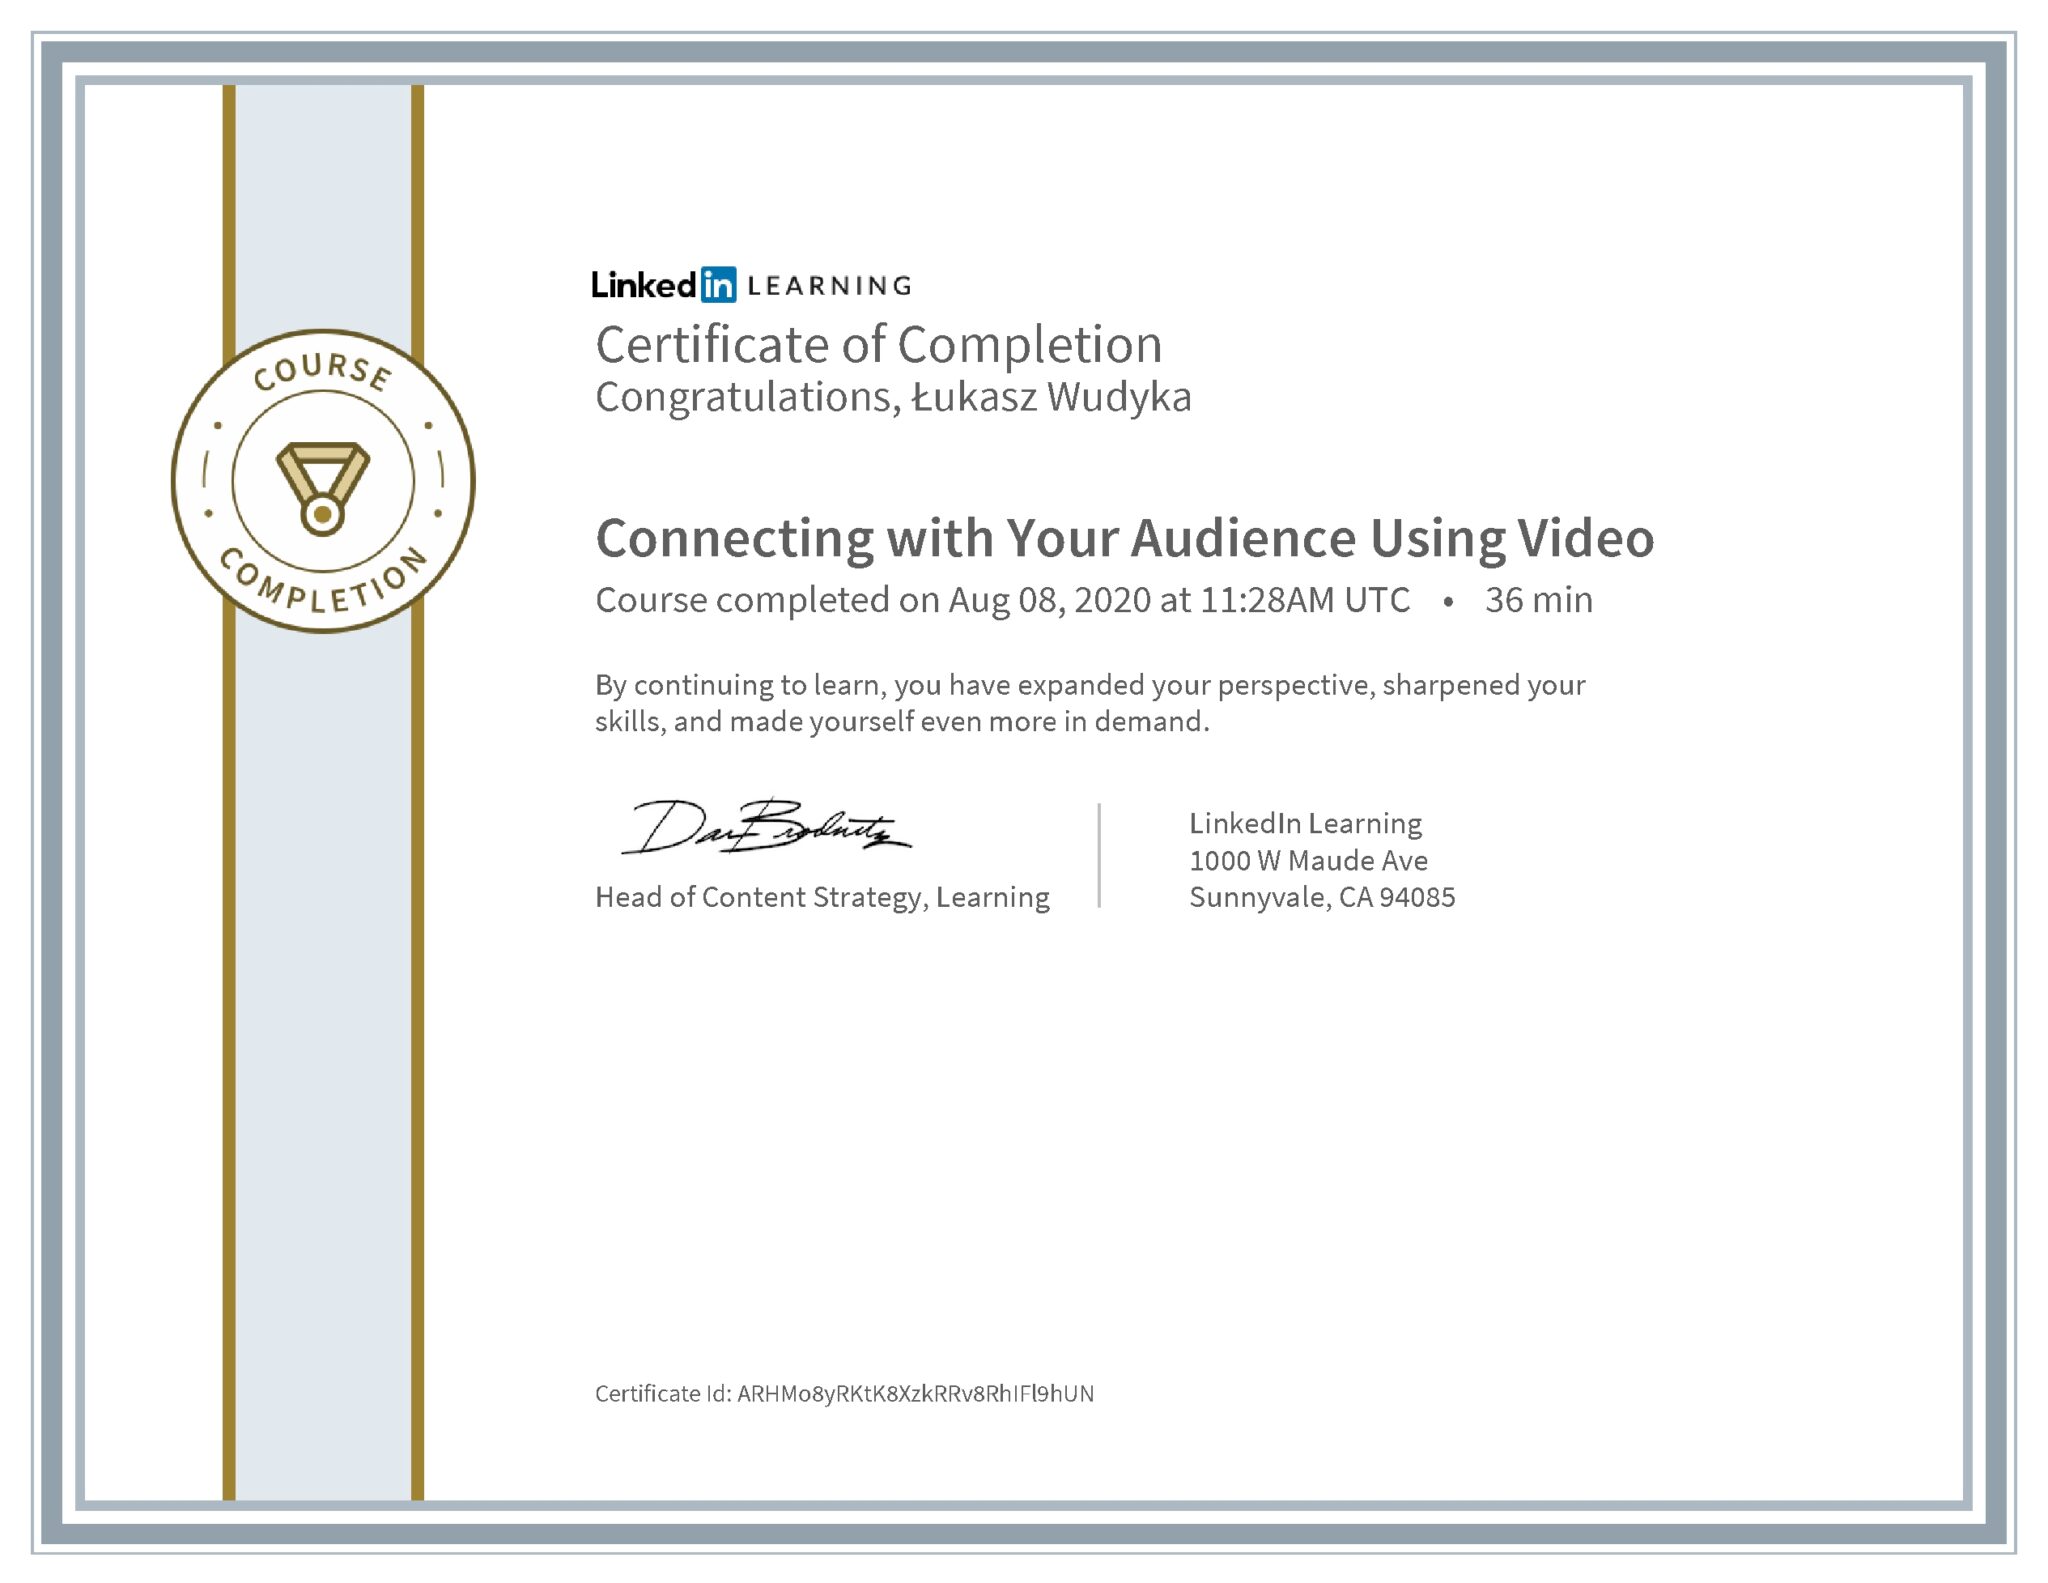 Łukasz Wudyka certyfikat LinkedIn Connecting with Your Audience Using Video